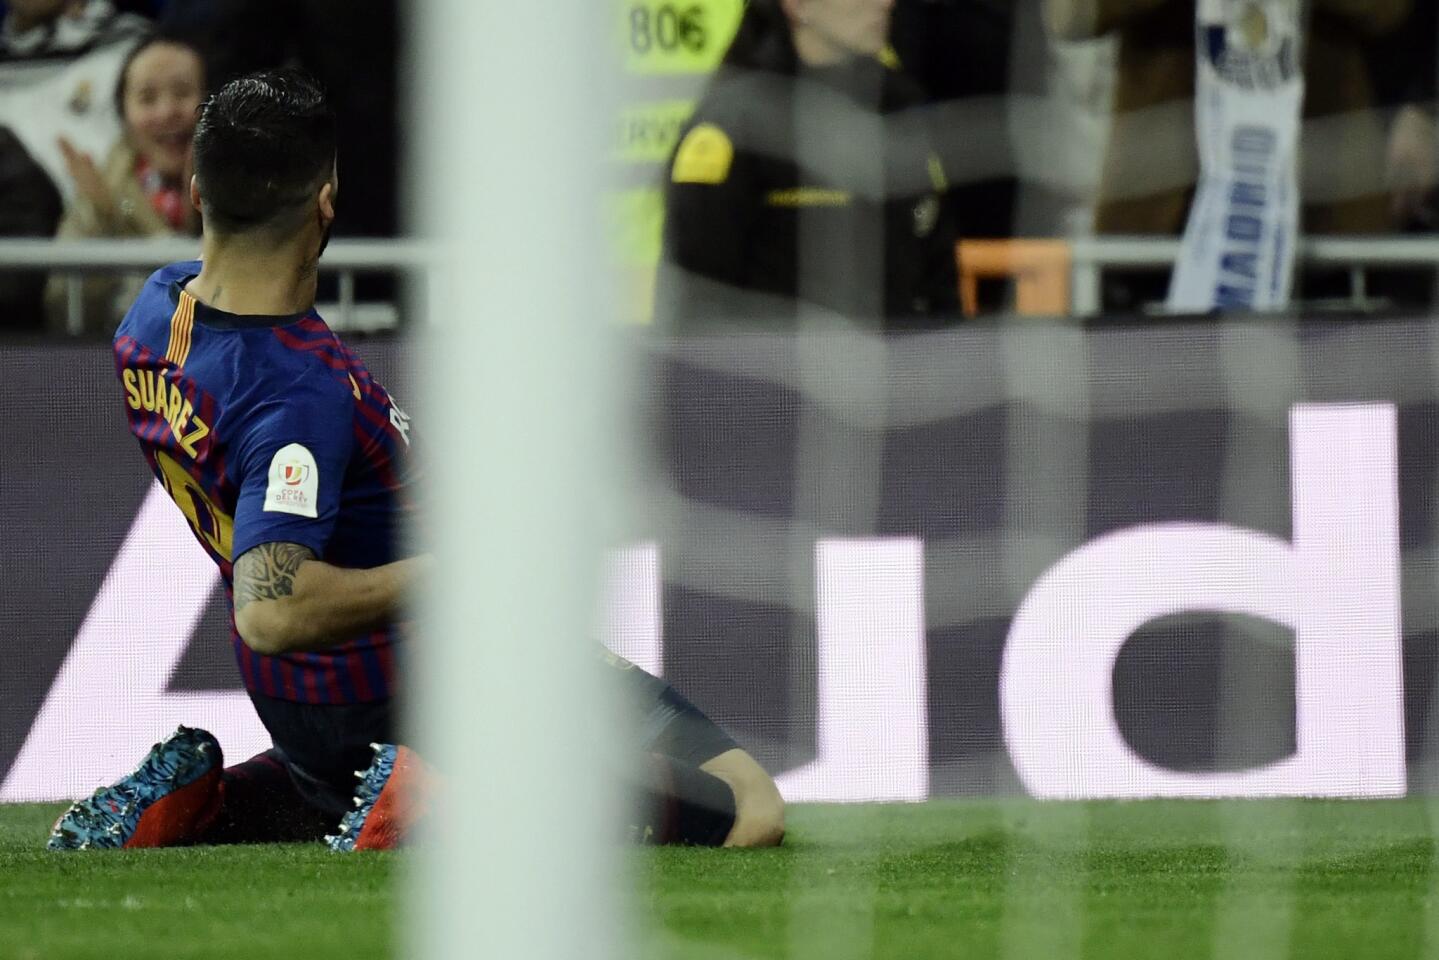 Barcelona's Uruguayan forward Luis Suarez celebrates his goal during the Spanish Copa del Rey (King's Cup) semi-final second leg football match between Real Madrid and Barcelona at the Santiago Bernabeu stadium in Madrid on February 27, 2019. (Photo by JAVIER SORIANO / AFP)JAVIER SORIANO/AFP/Getty Images ** OUTS - ELSENT, FPG, CM - OUTS * NM, PH, VA if sourced by CT, LA or MoD **